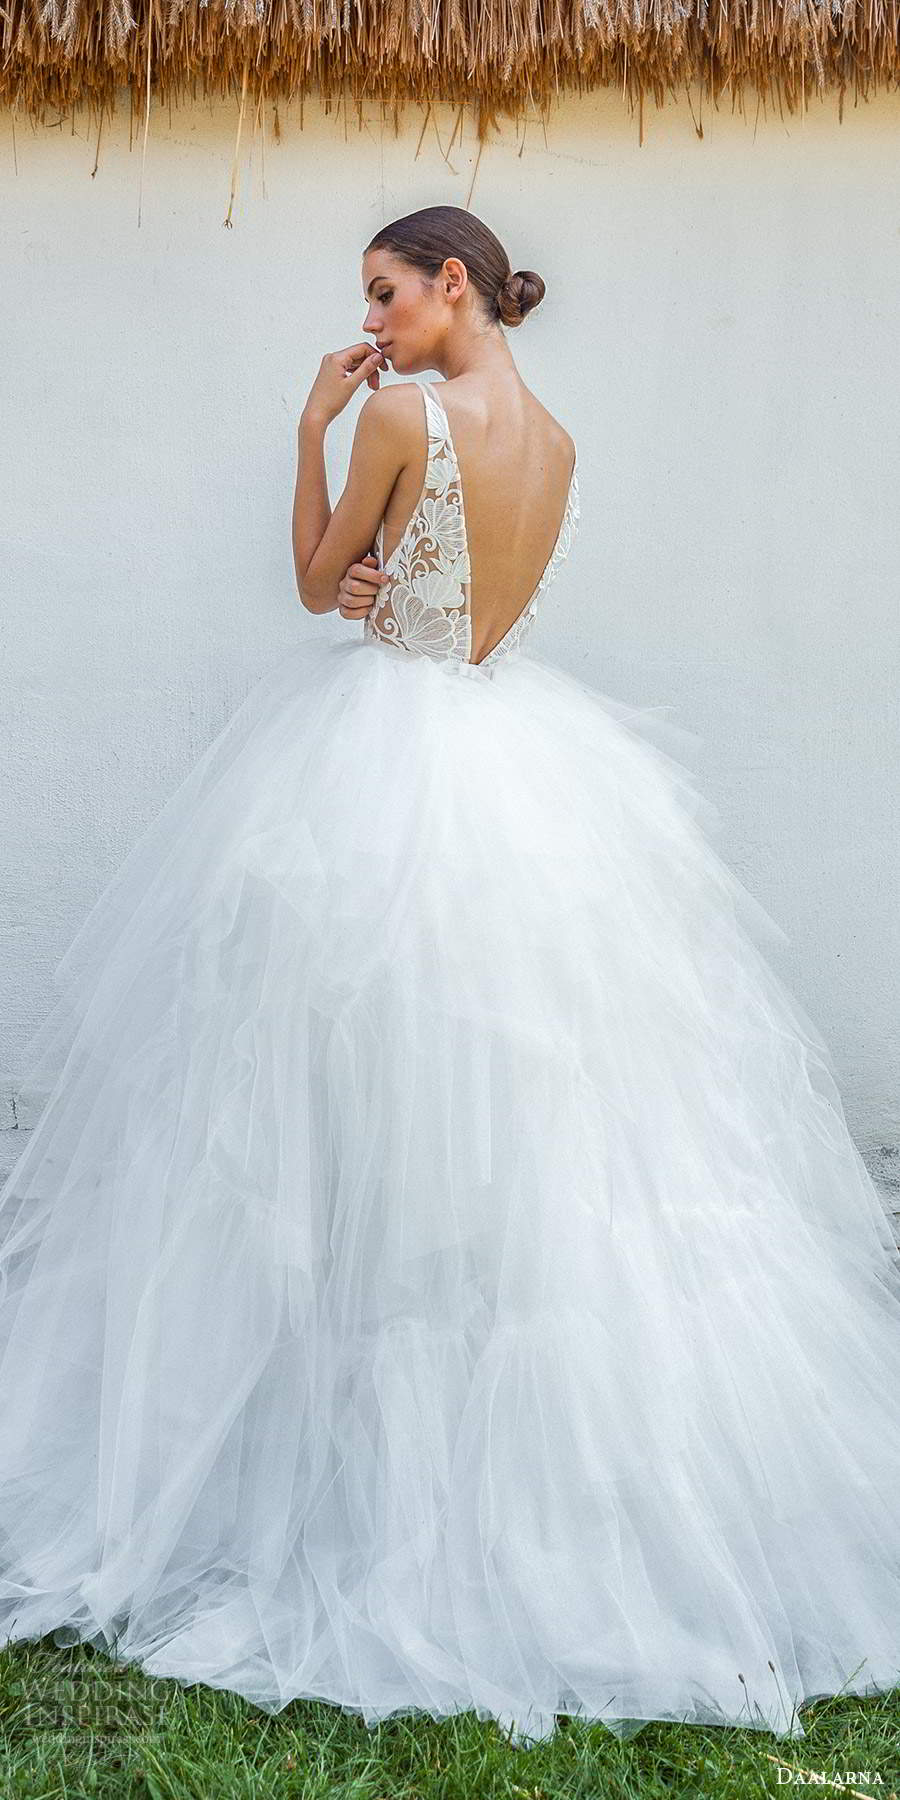 daalarna fall 2020 bridal sleeveless illusion straps v neckline sheer embellished bodice a line ball gown wedding dress tiered skirt sweep train (3) bv